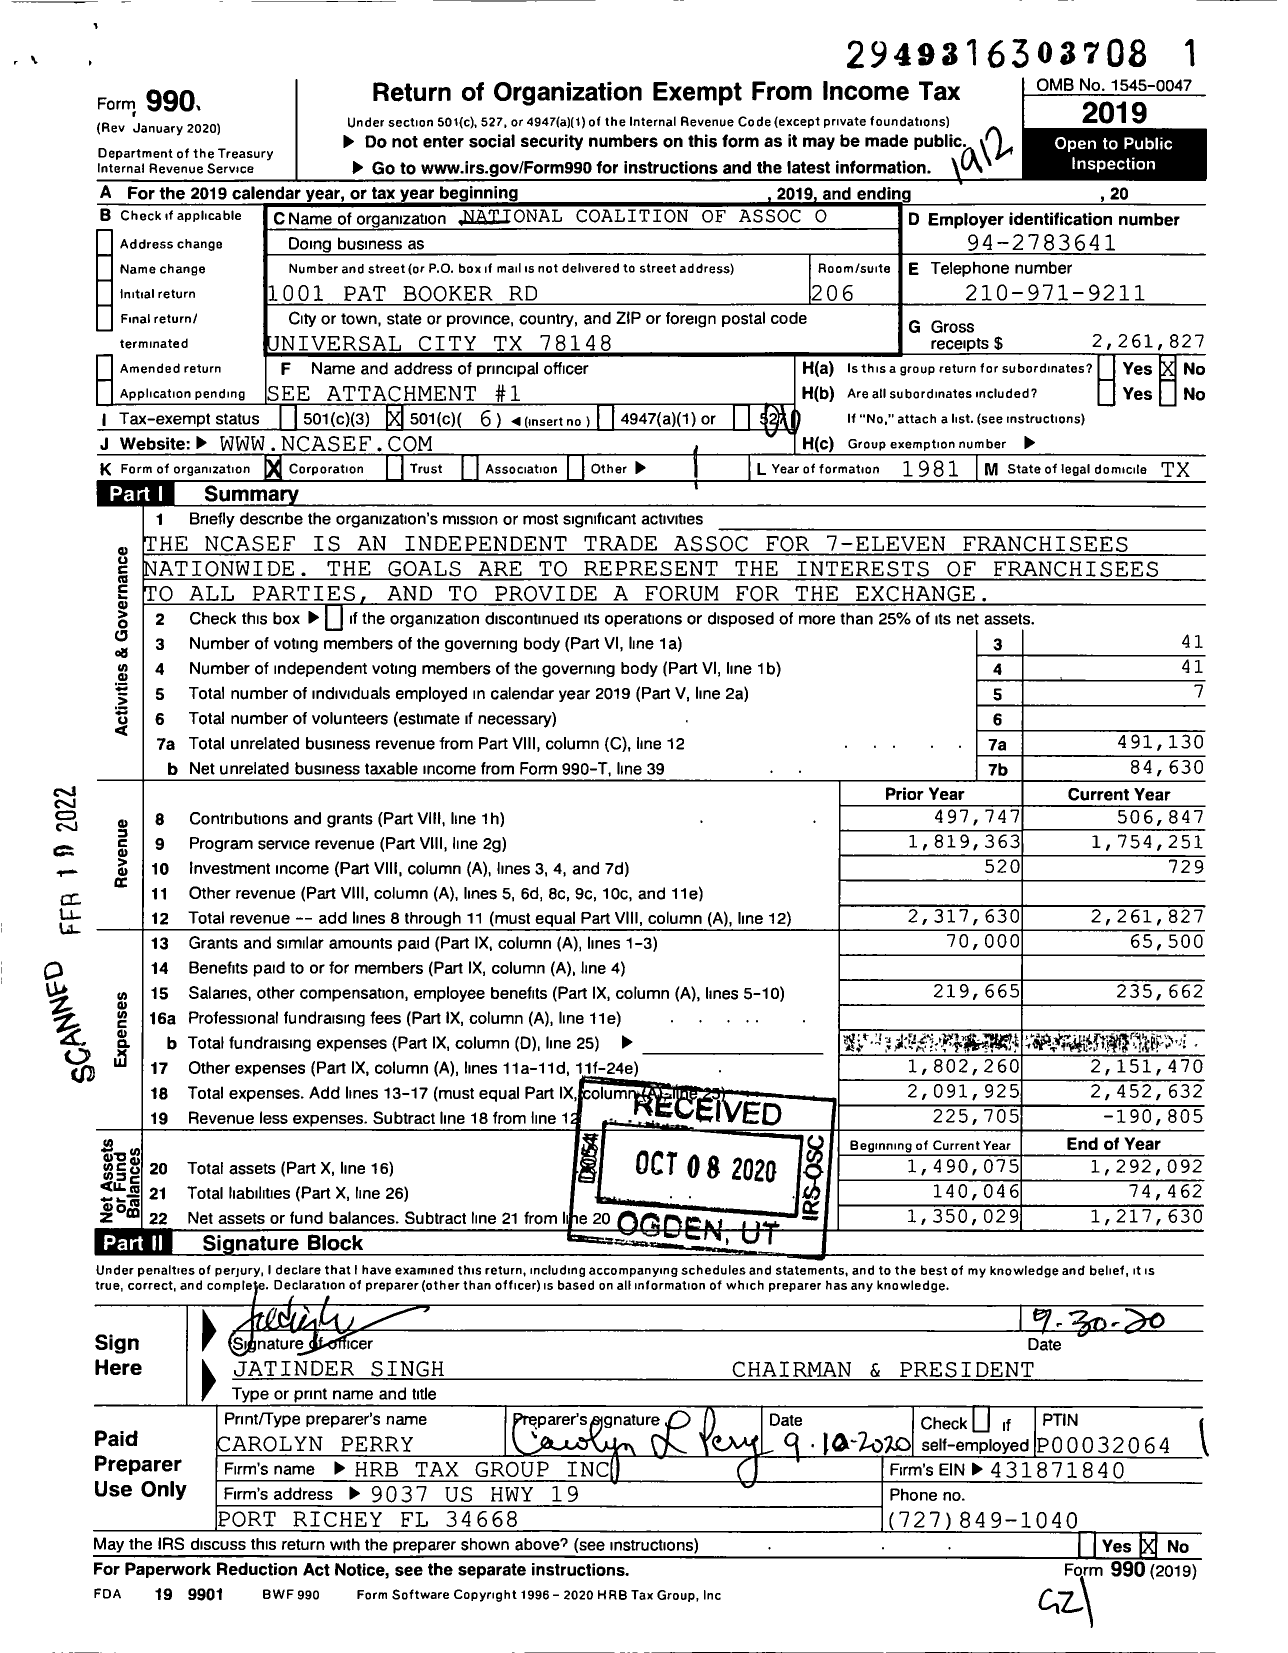 Image of first page of 2019 Form 990O for National Coalition of Associations of 7 Eleven Franchisees (NCASEF)